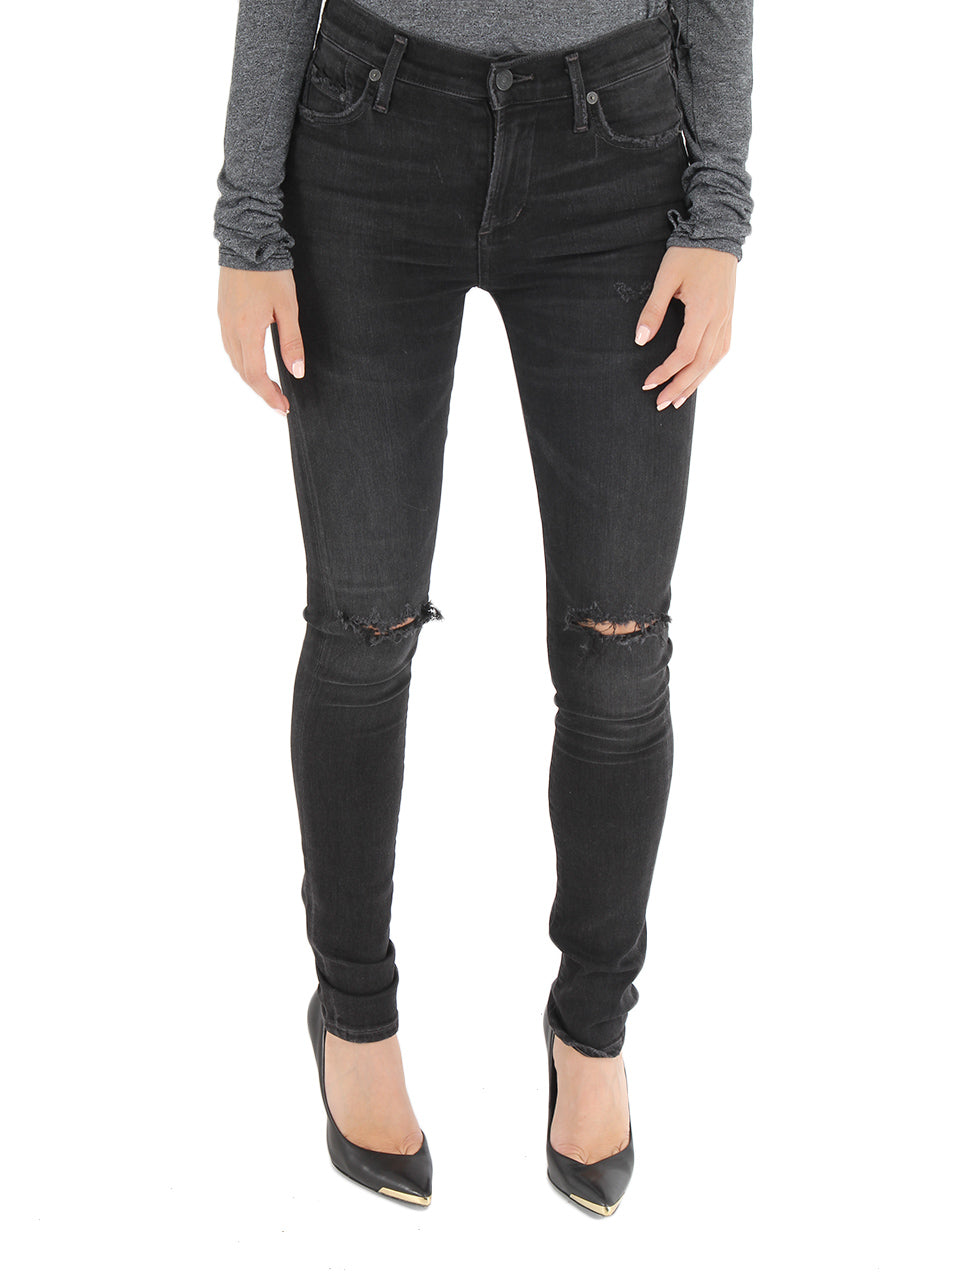 Rocket High Rise Skinny in Distressed Darkness - CITIZENS OF HUMANITY